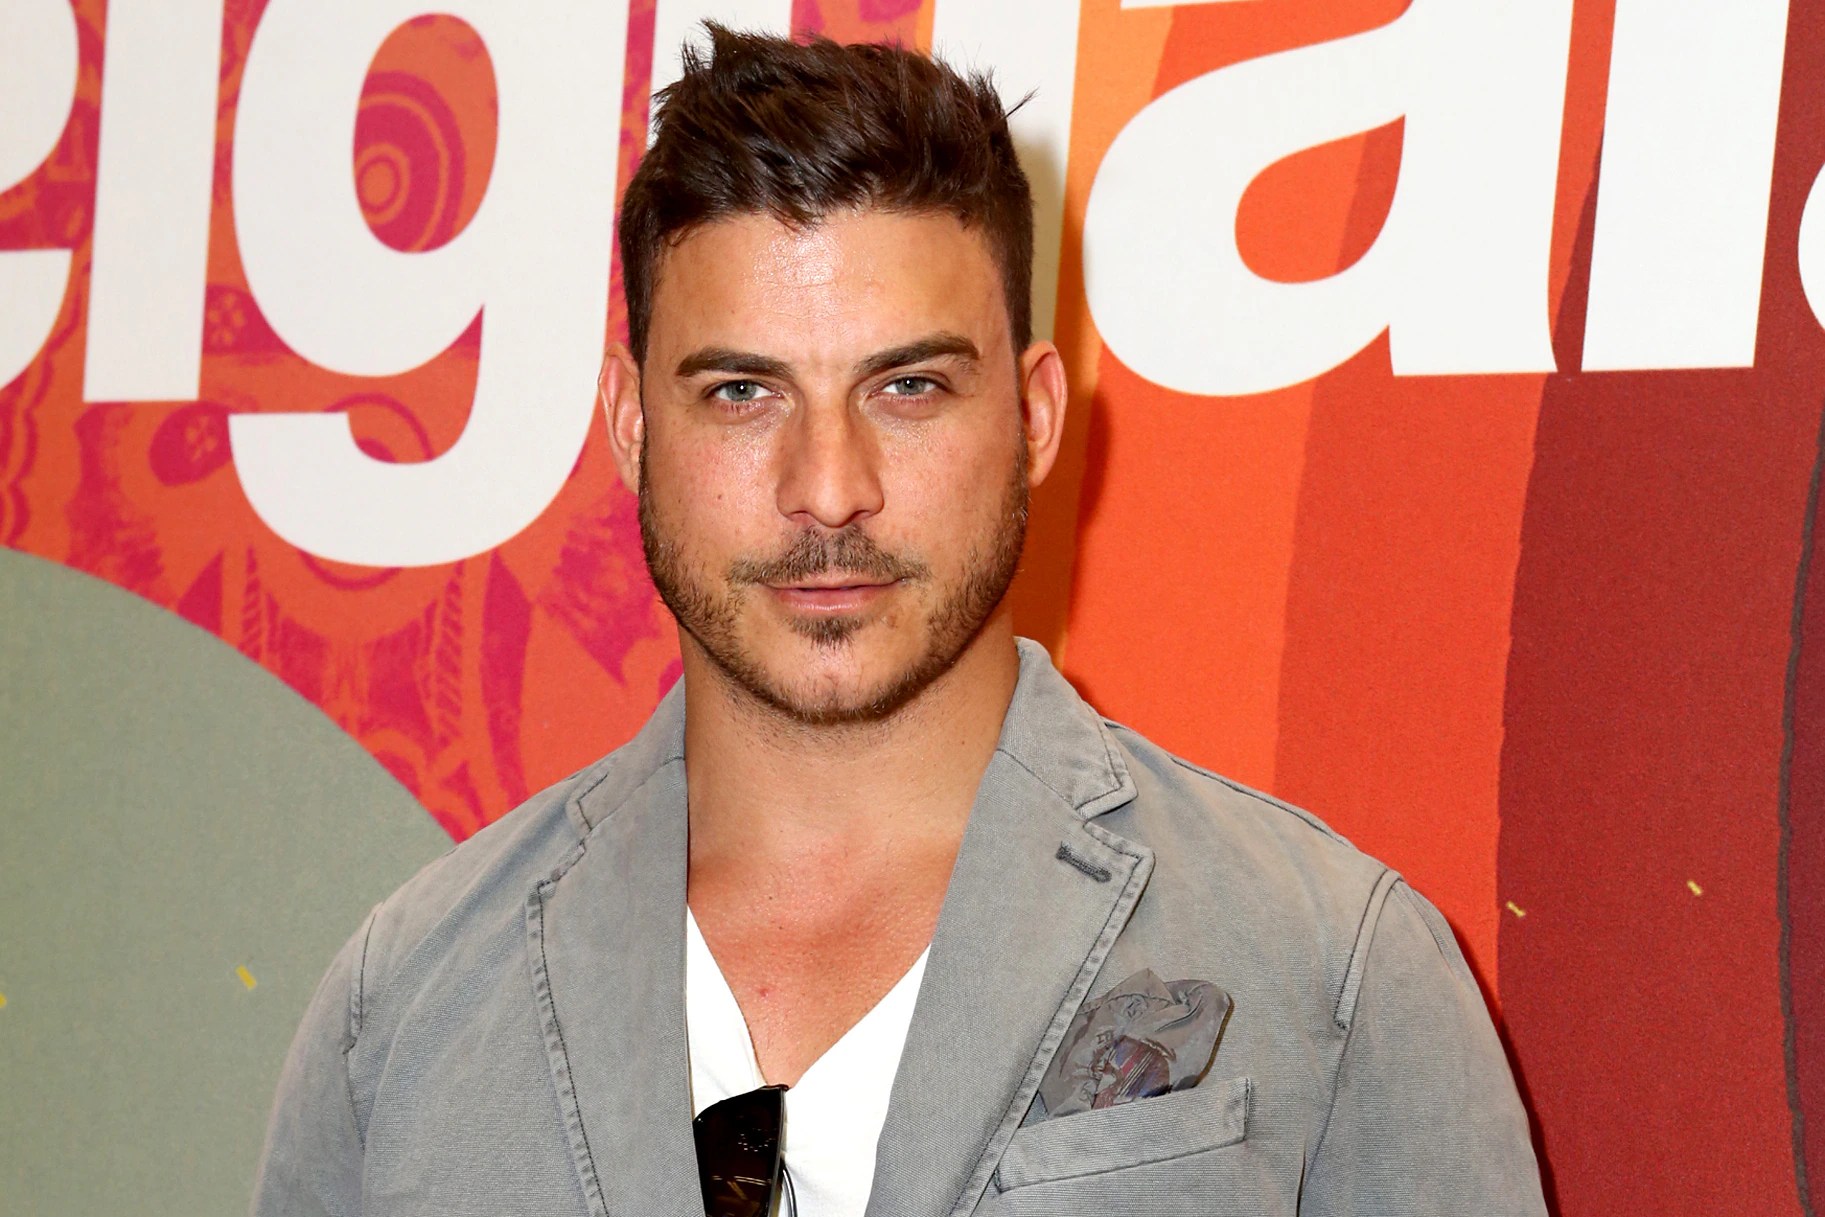 Jax Taylor Fans Think I Only Do 'Douchey' Things The Daily Dish